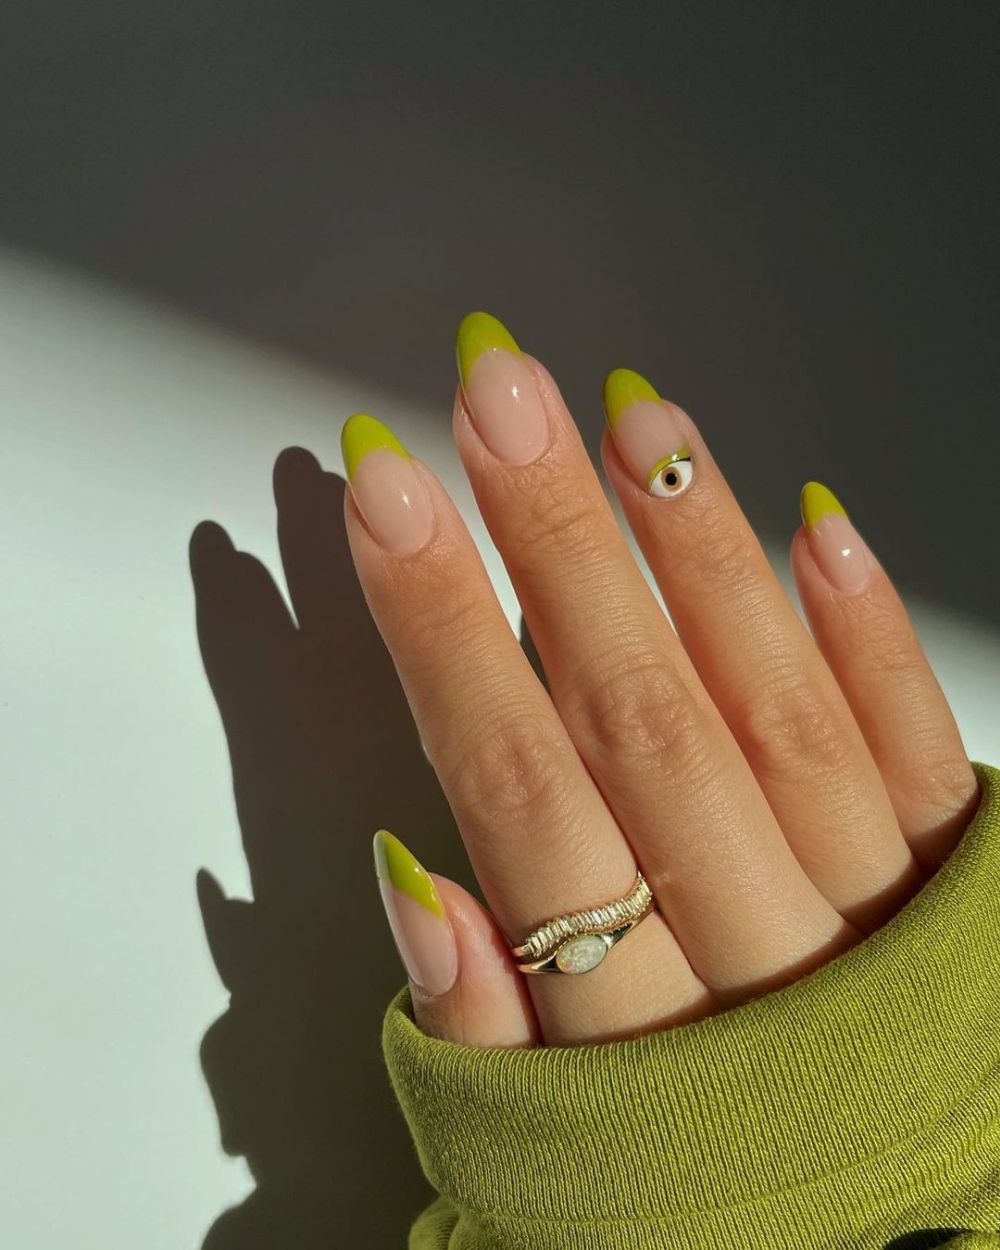 30 Neon Nail Designs That Will Light Up Your Summer | Le Chic Street